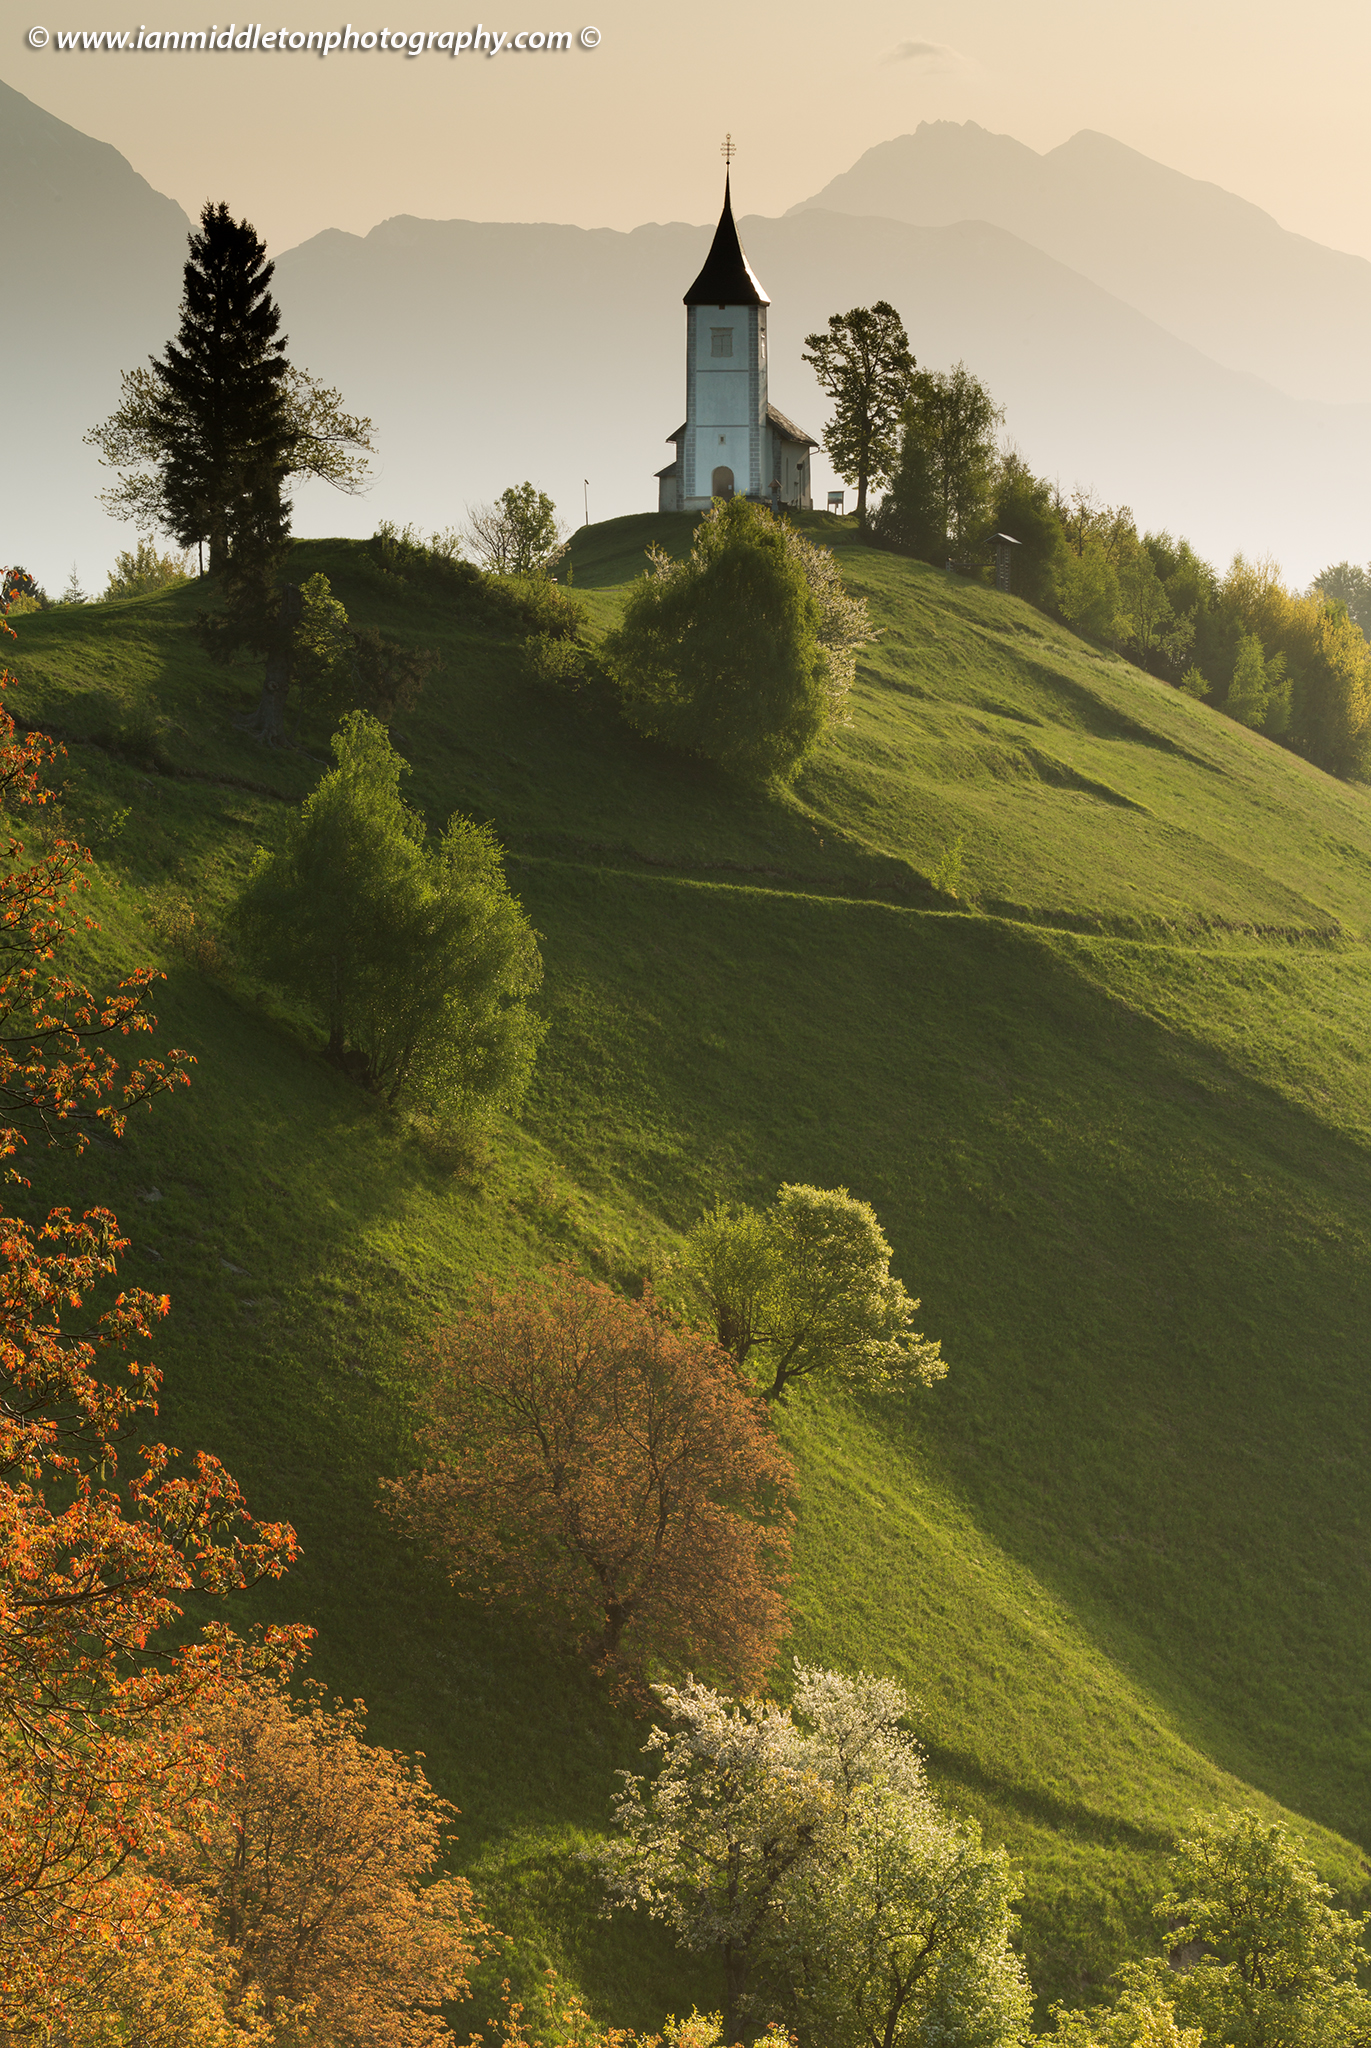 Jamnik church of Saints Primus and Felician, perched on a hill on the Jelovica Plateau with the kamnik alps and Storzic mountain in the background, Slovenia.